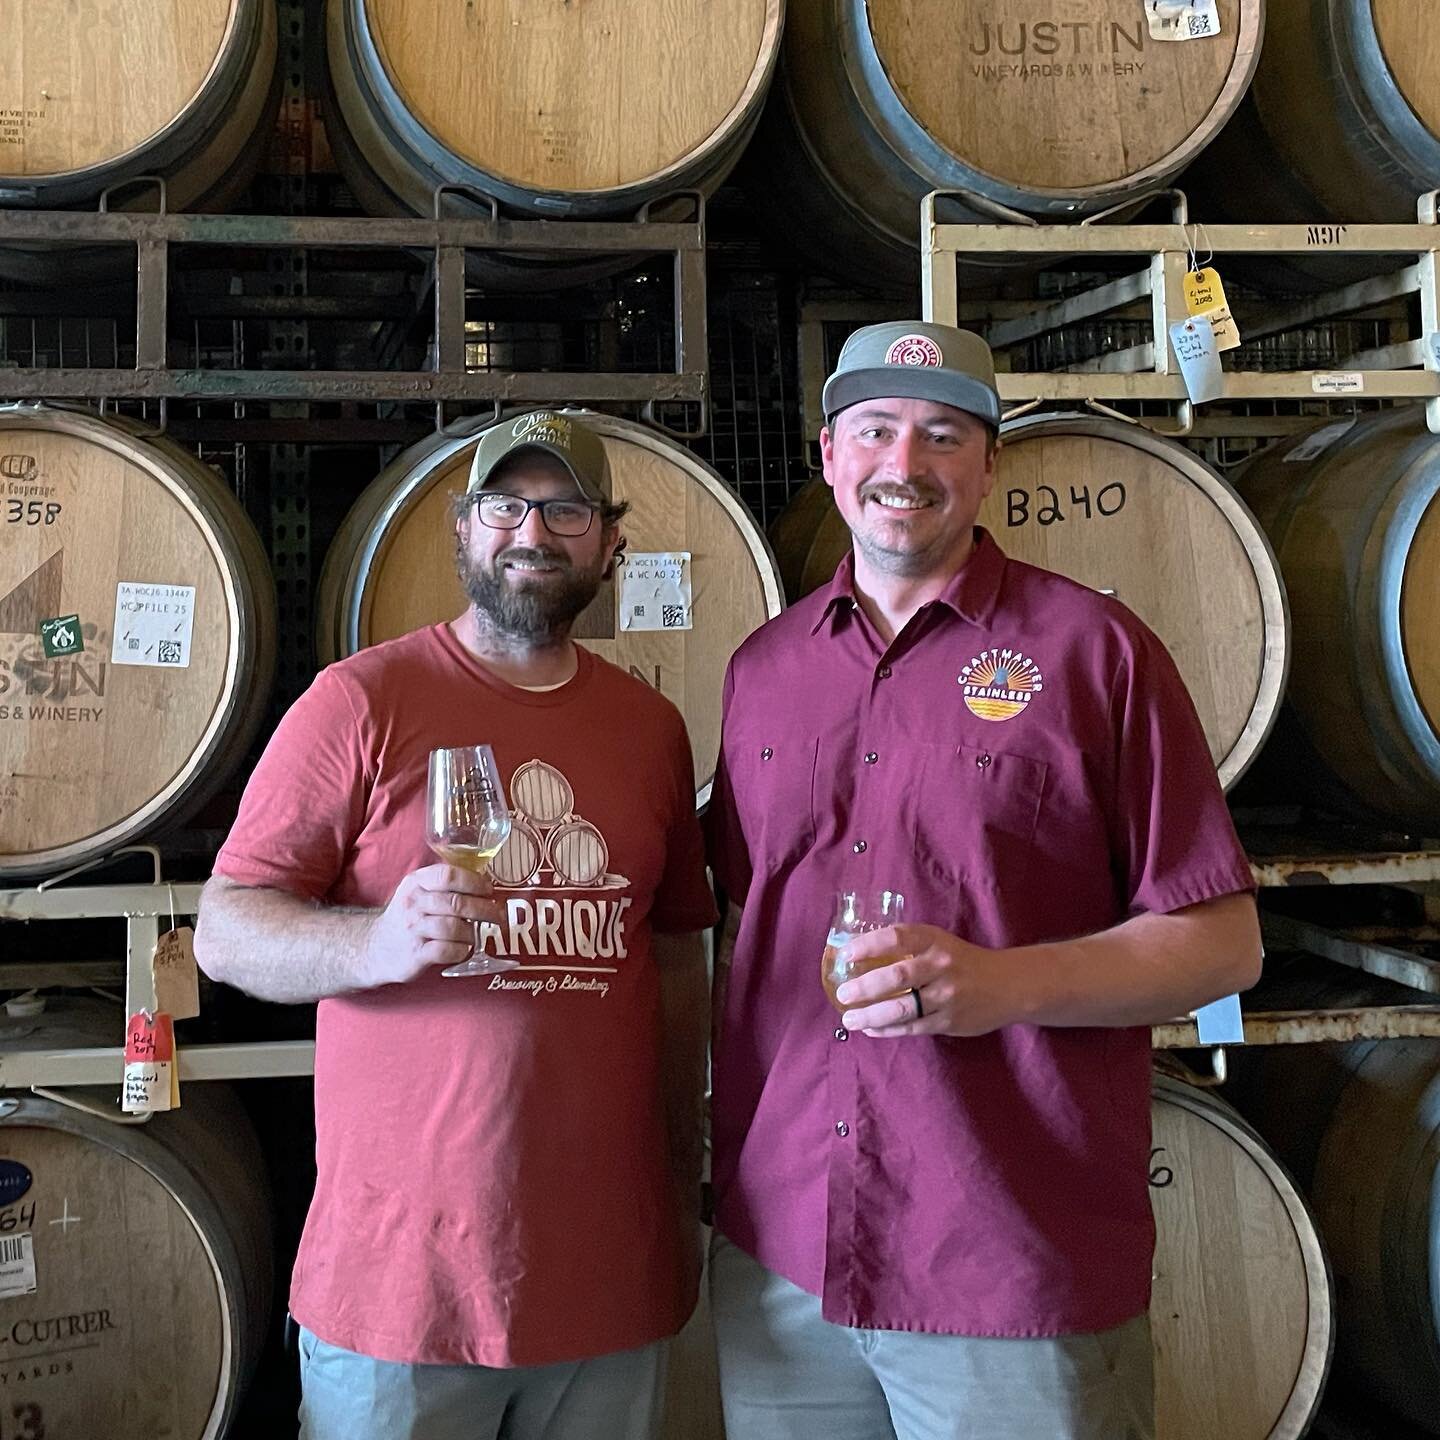 Here at Craftmaster Stainless we love to meet our customers and see their establishments.⁣
⁣
That's why we wanted to thank Joel and his team at Barrique Brewing &amp; Blending for making time for us during an extremely busy week. ⁣
⁣
It was great to 